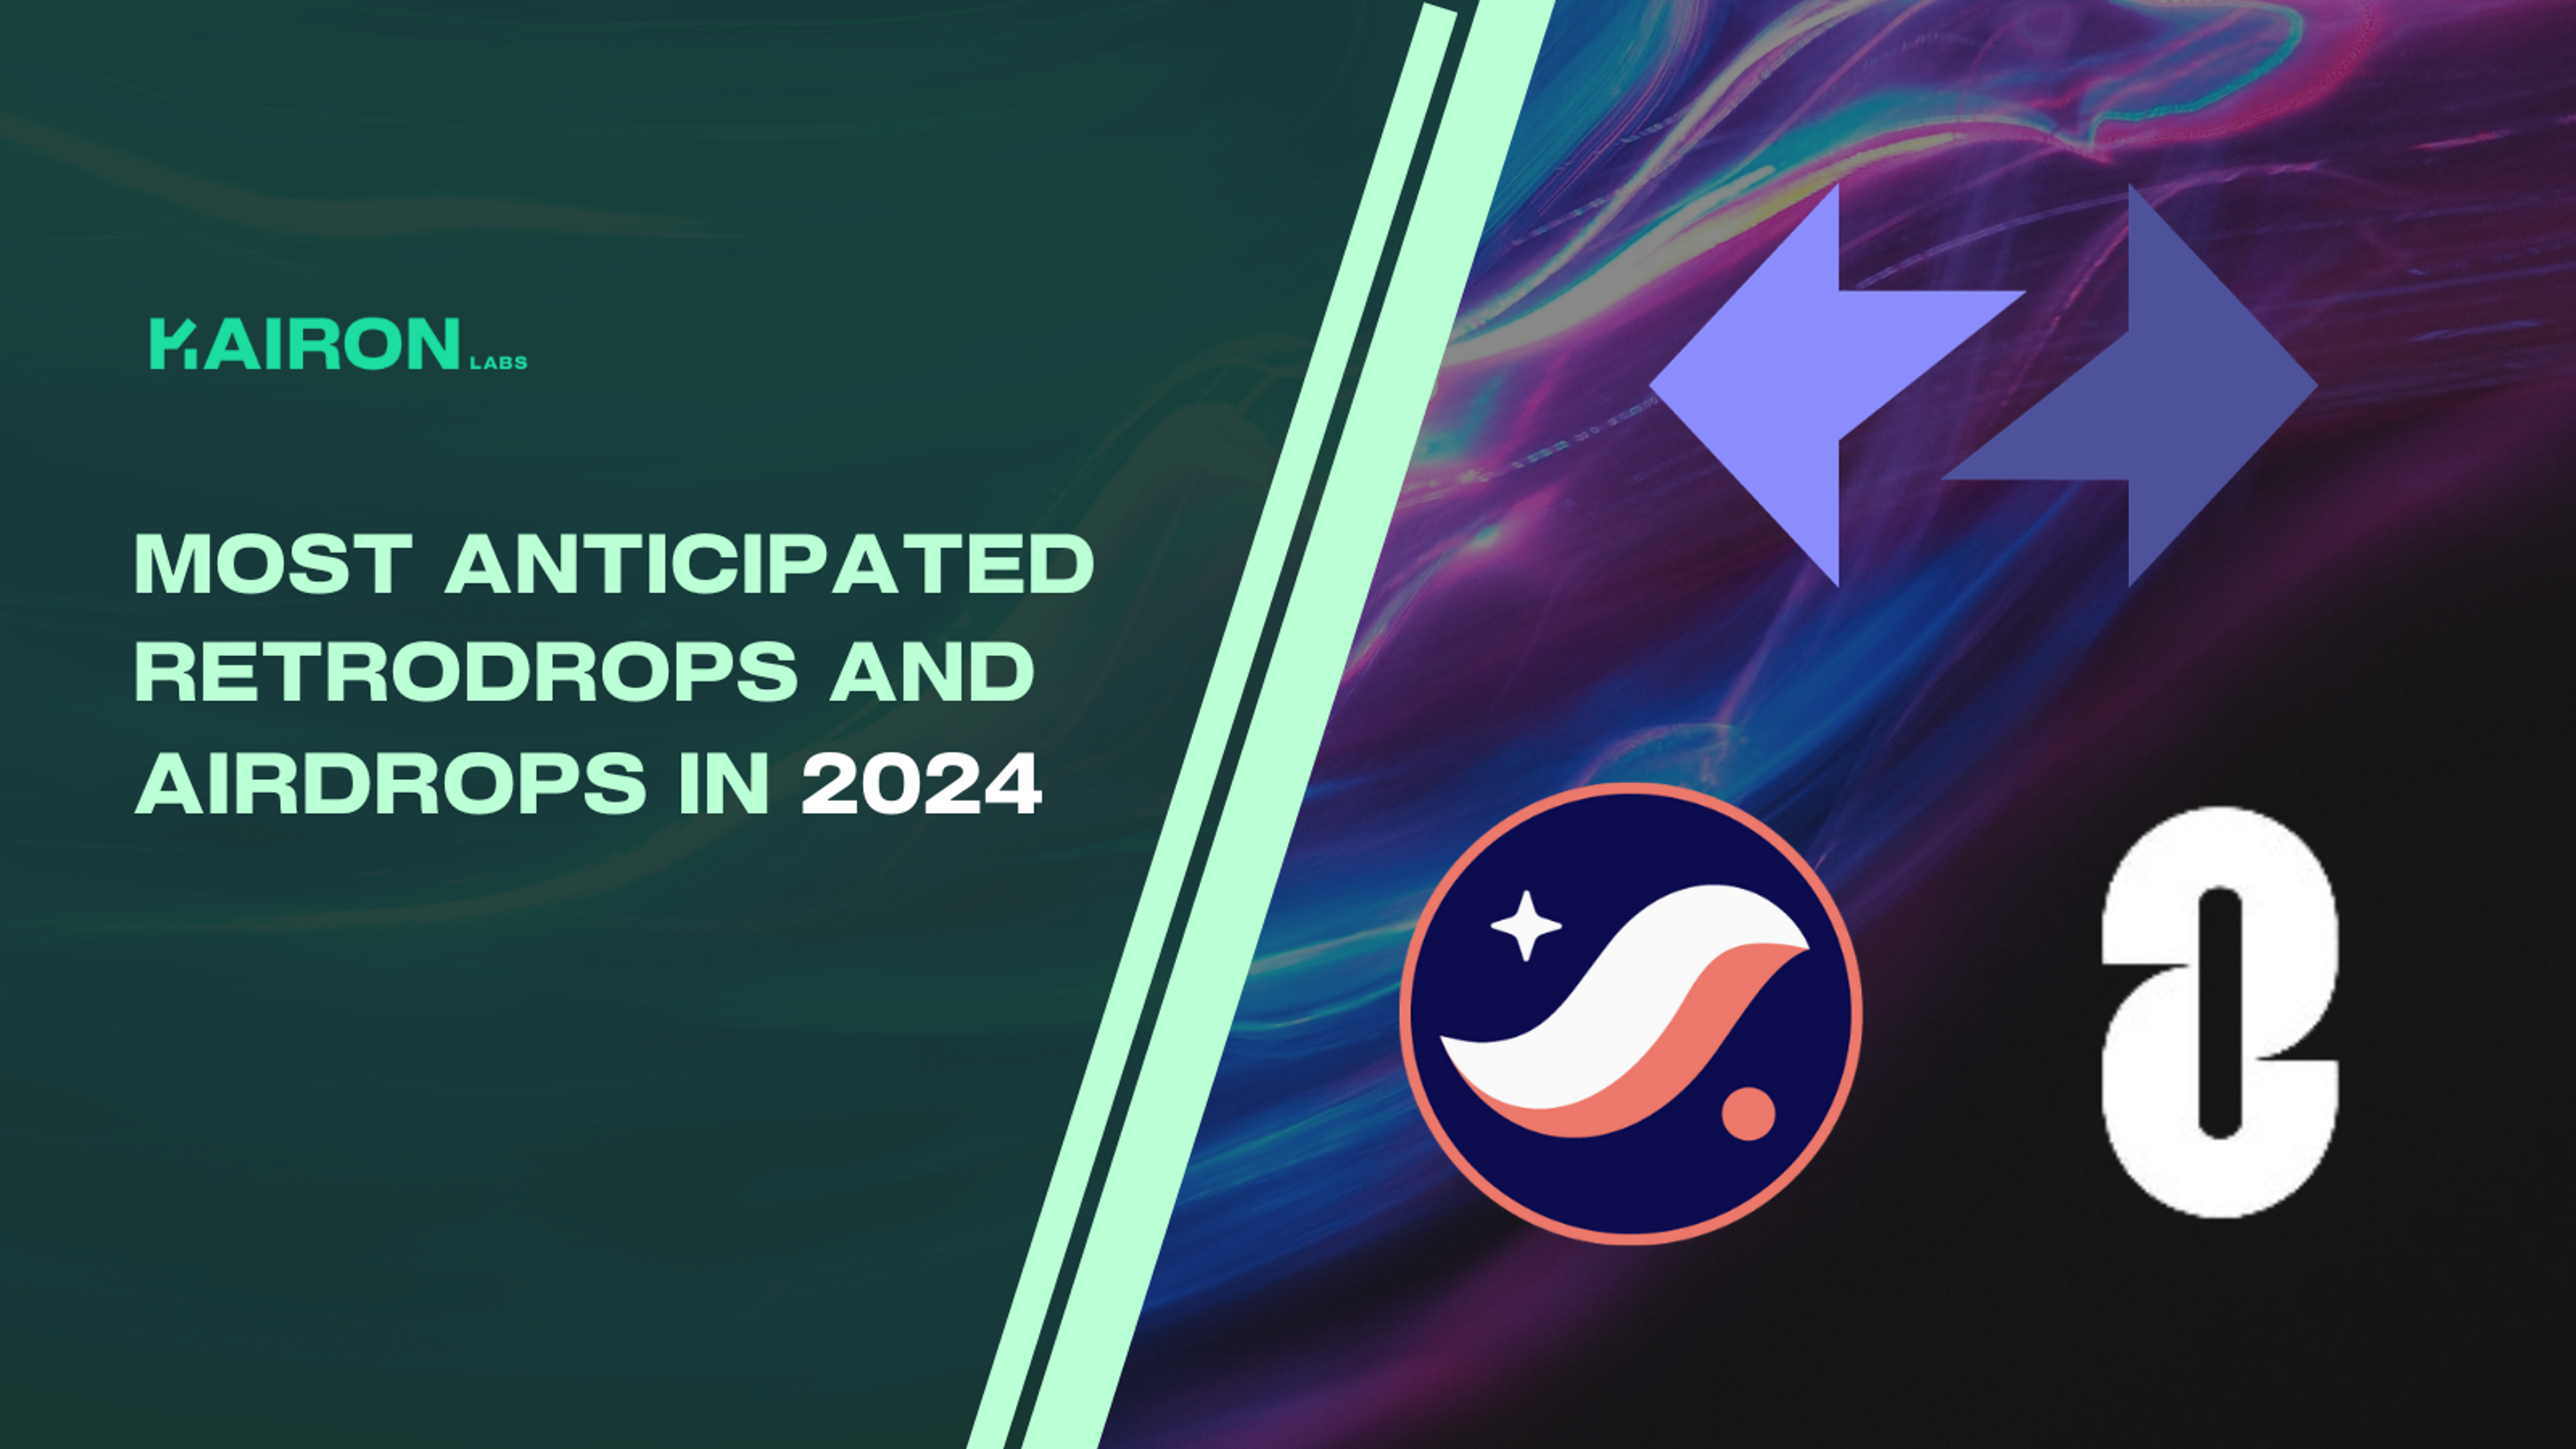 Most Anticipated Airdrop and Retrodrop in 2024